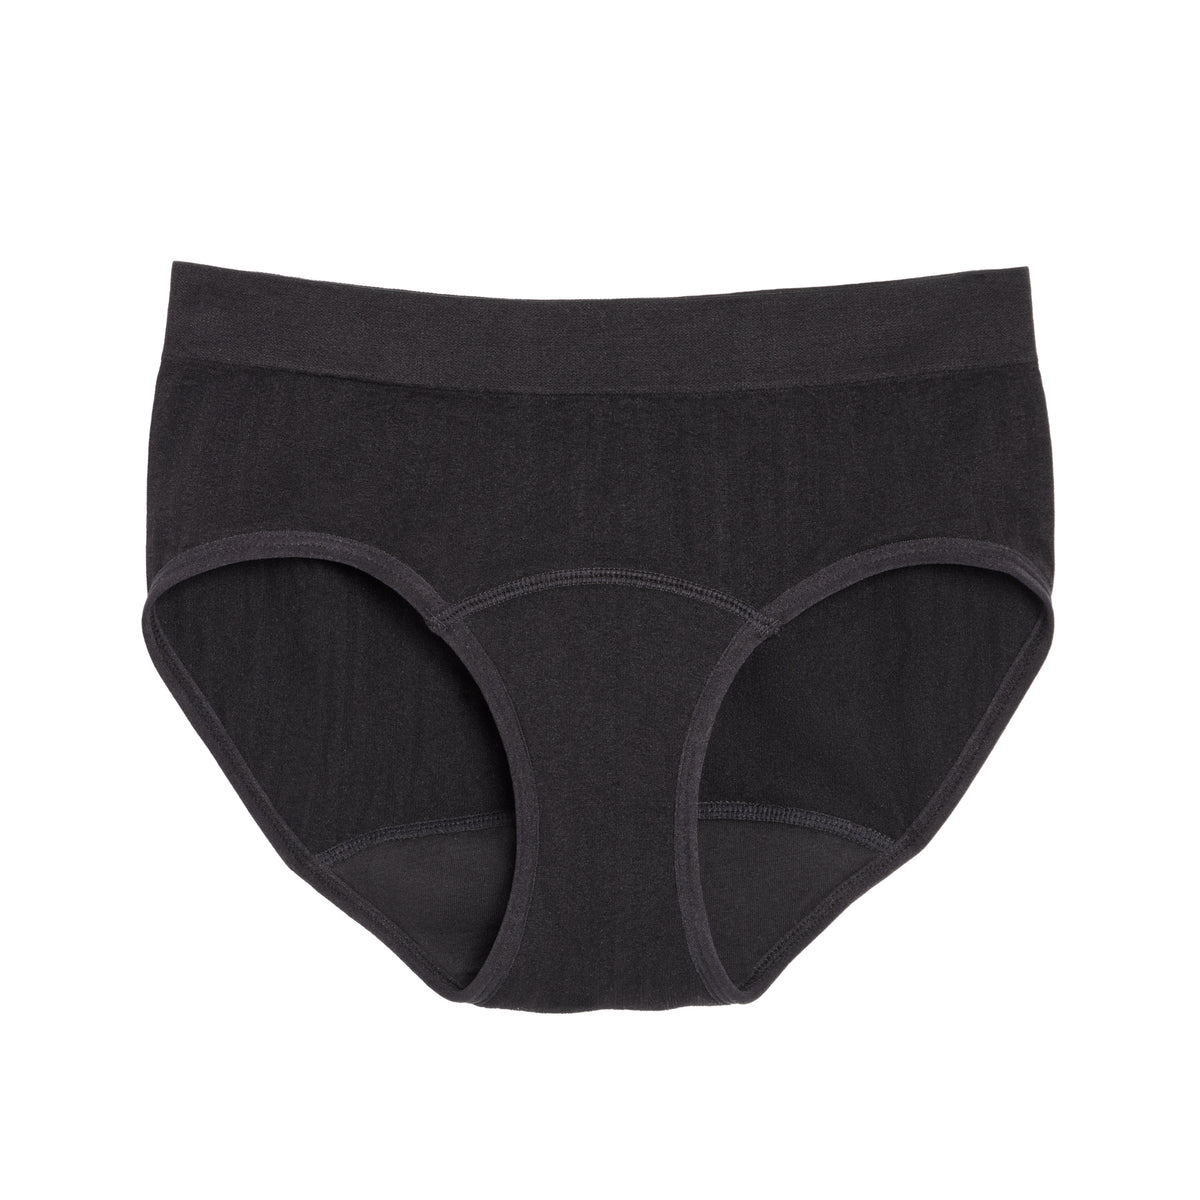 Bambody Absorbent Hipster: Sporty Period Panties  Protective Active Wear  Underwear - 5 Pack: Black - Size 4 at  Women's Clothing store